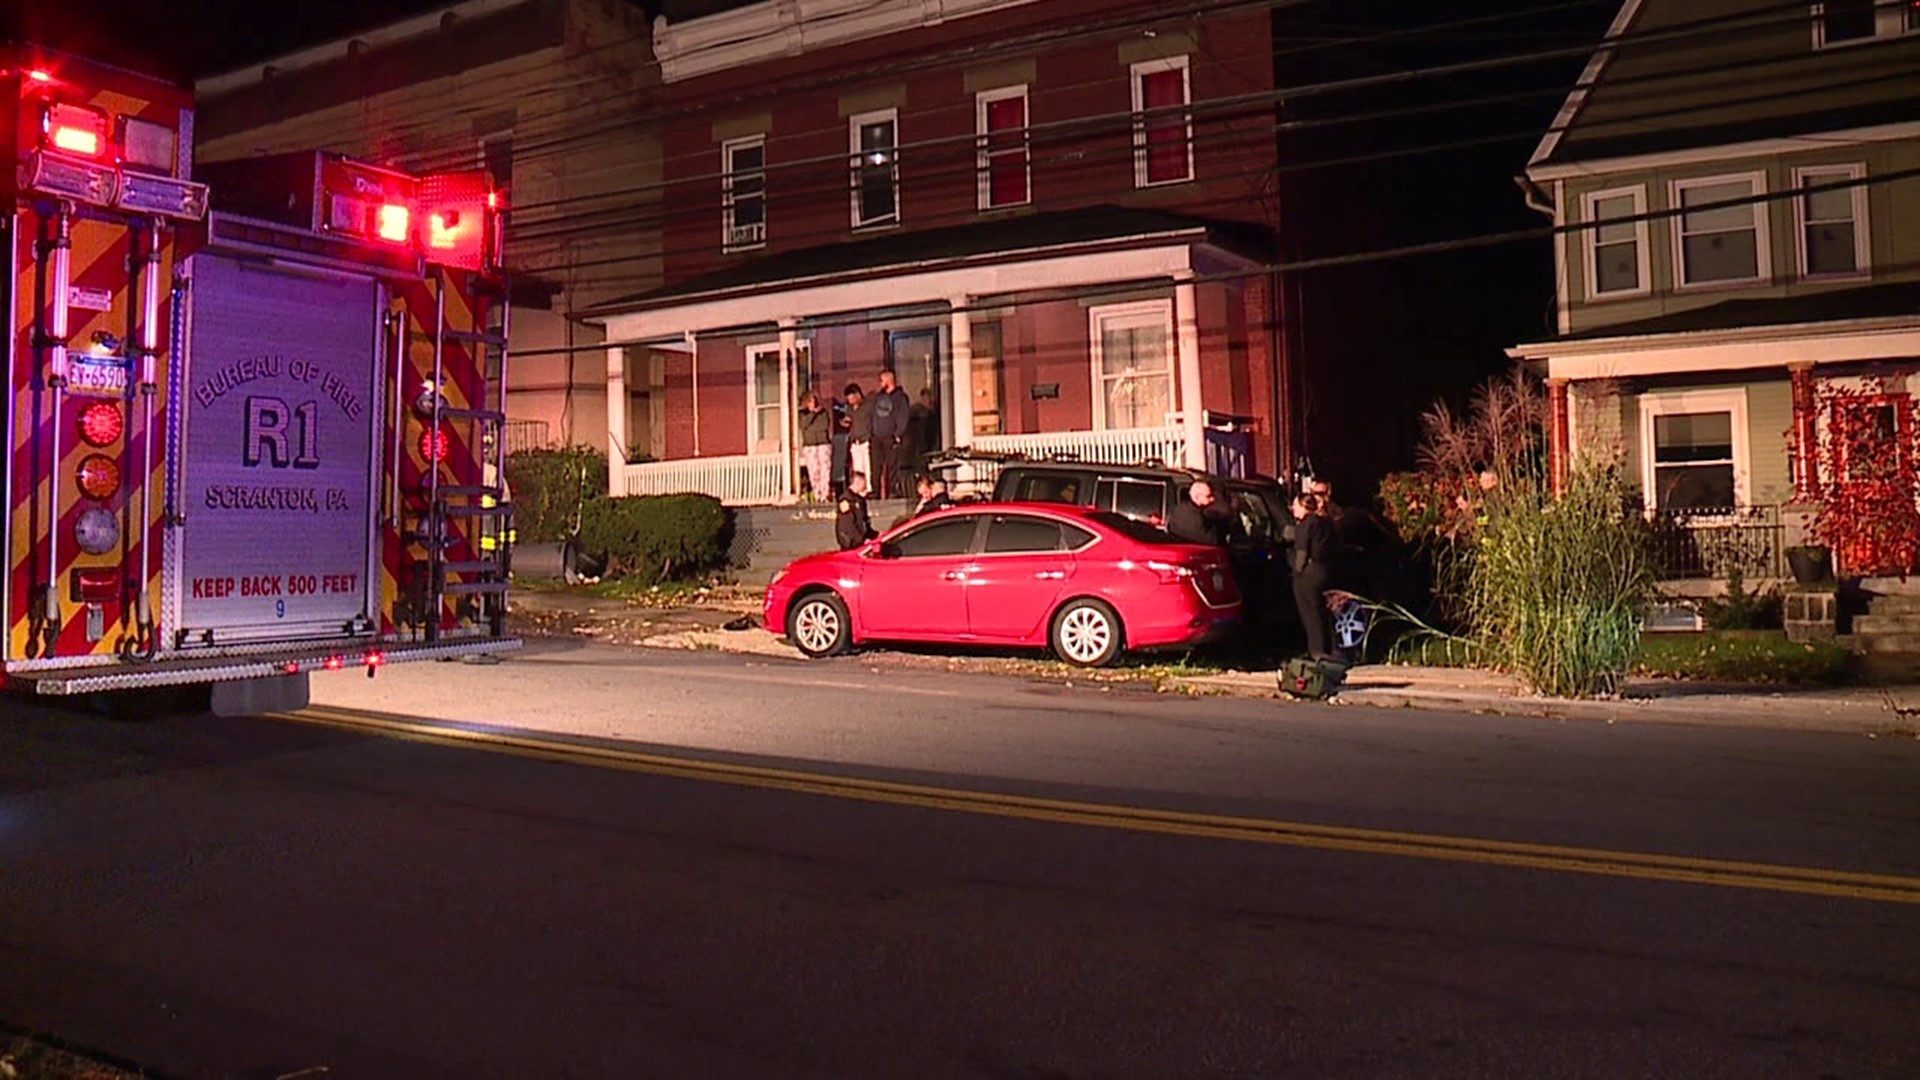 The crash happened around 5 a.m. along Moosic Street in the city.